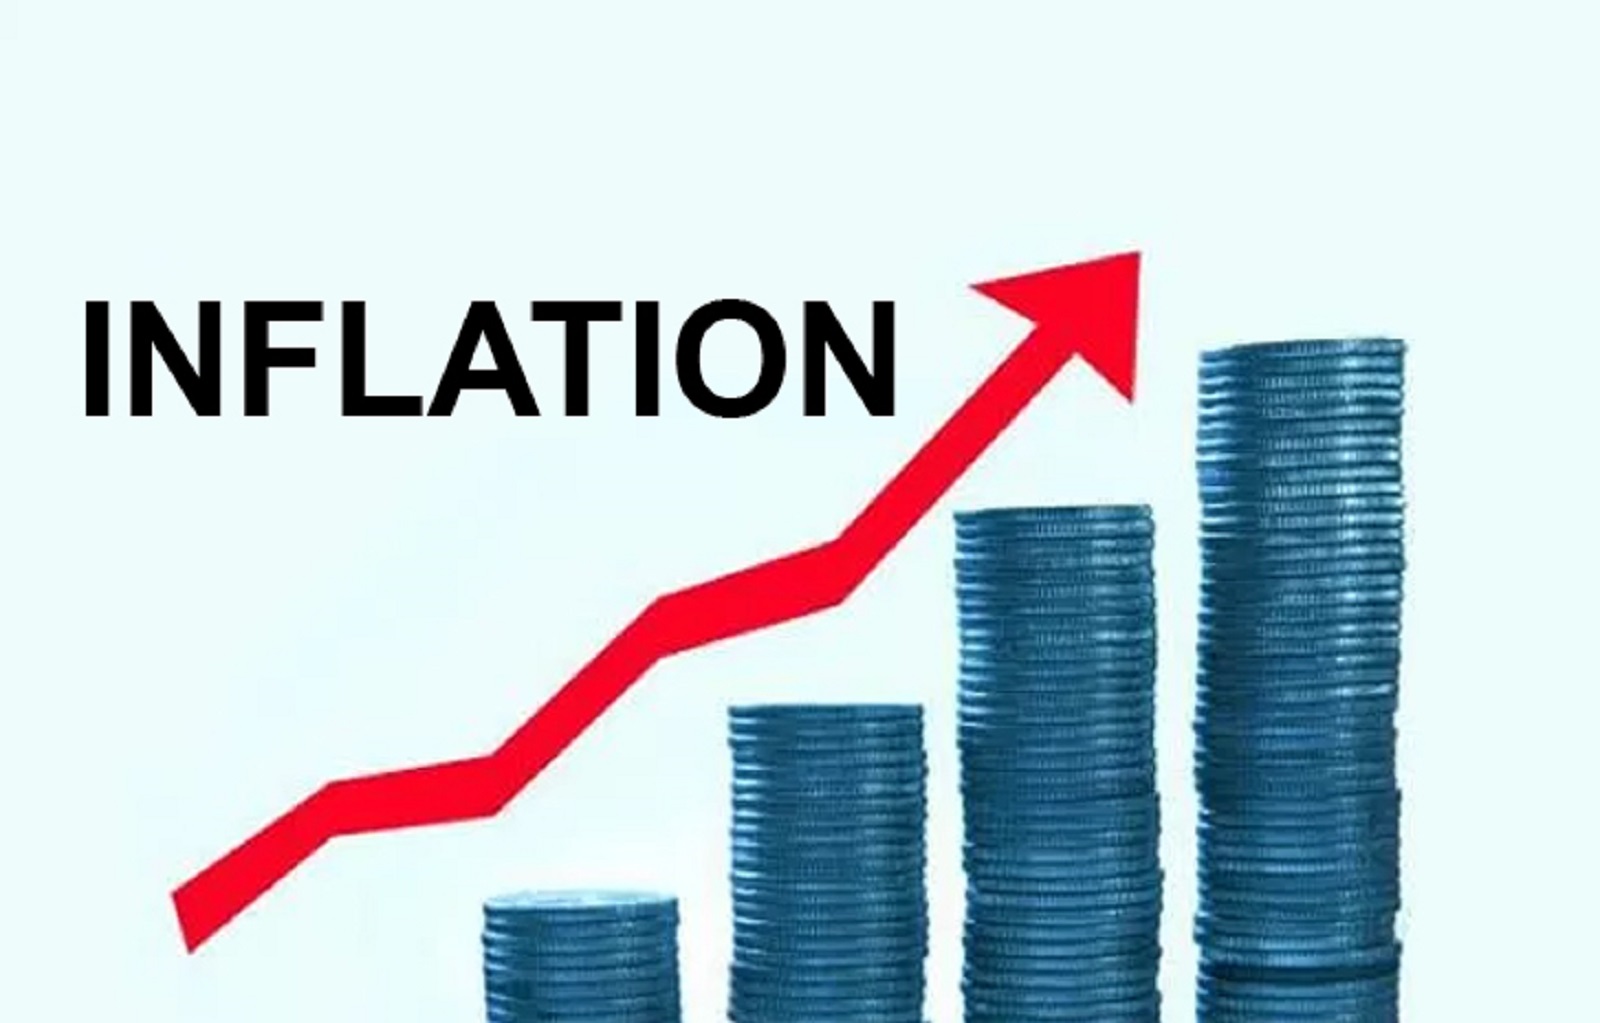 What is inflation? Inflation rate 2019 Philippines